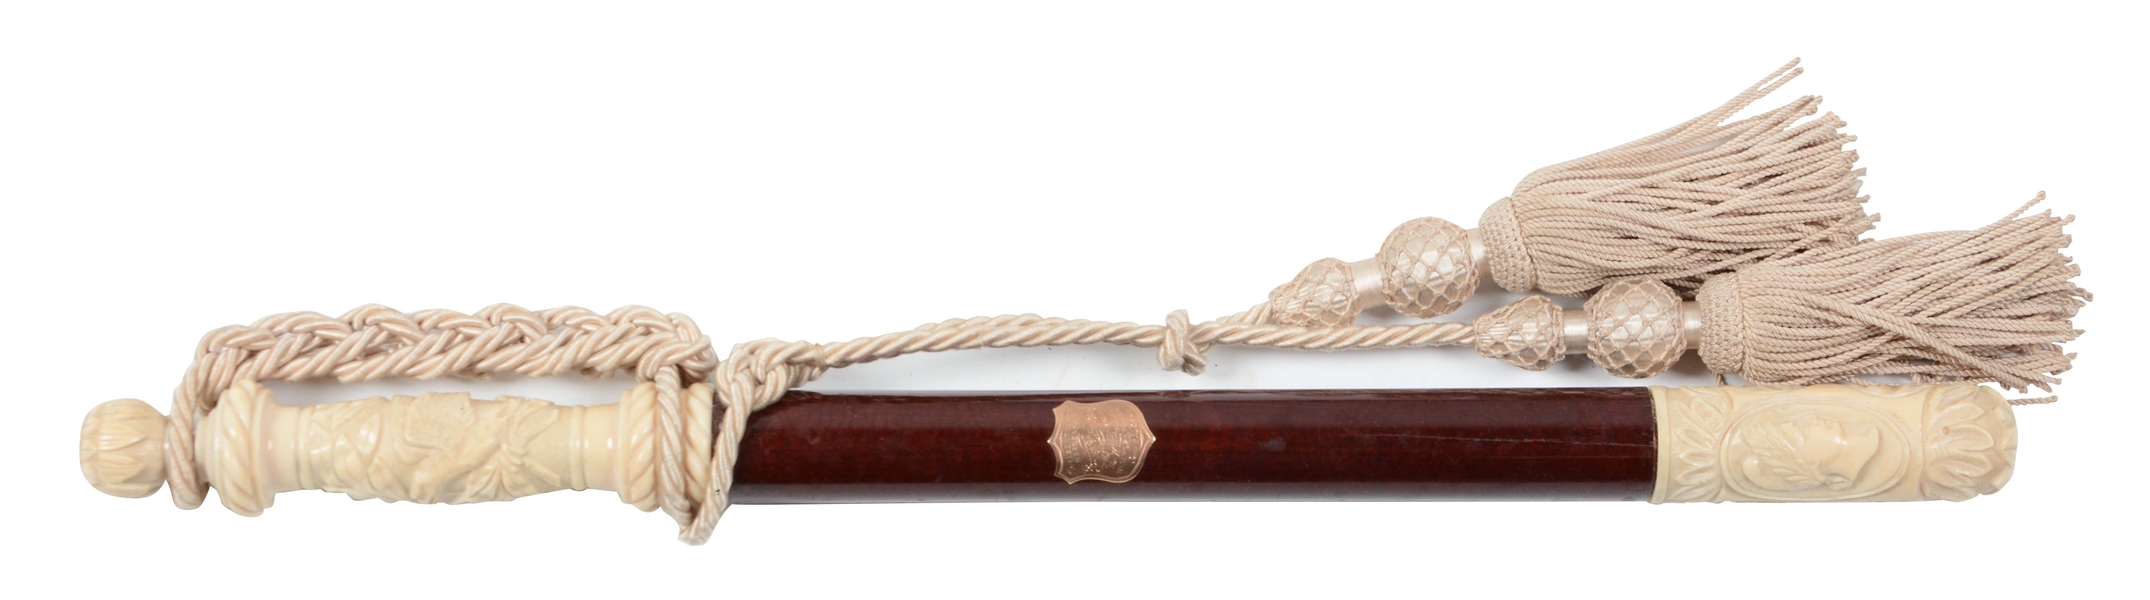 CASED PRESENTATION ROSEWOOD AND IVORY POLICE BATON WITH SOLID GOLD PRESENTATION INSCRIBED PLAQUE.